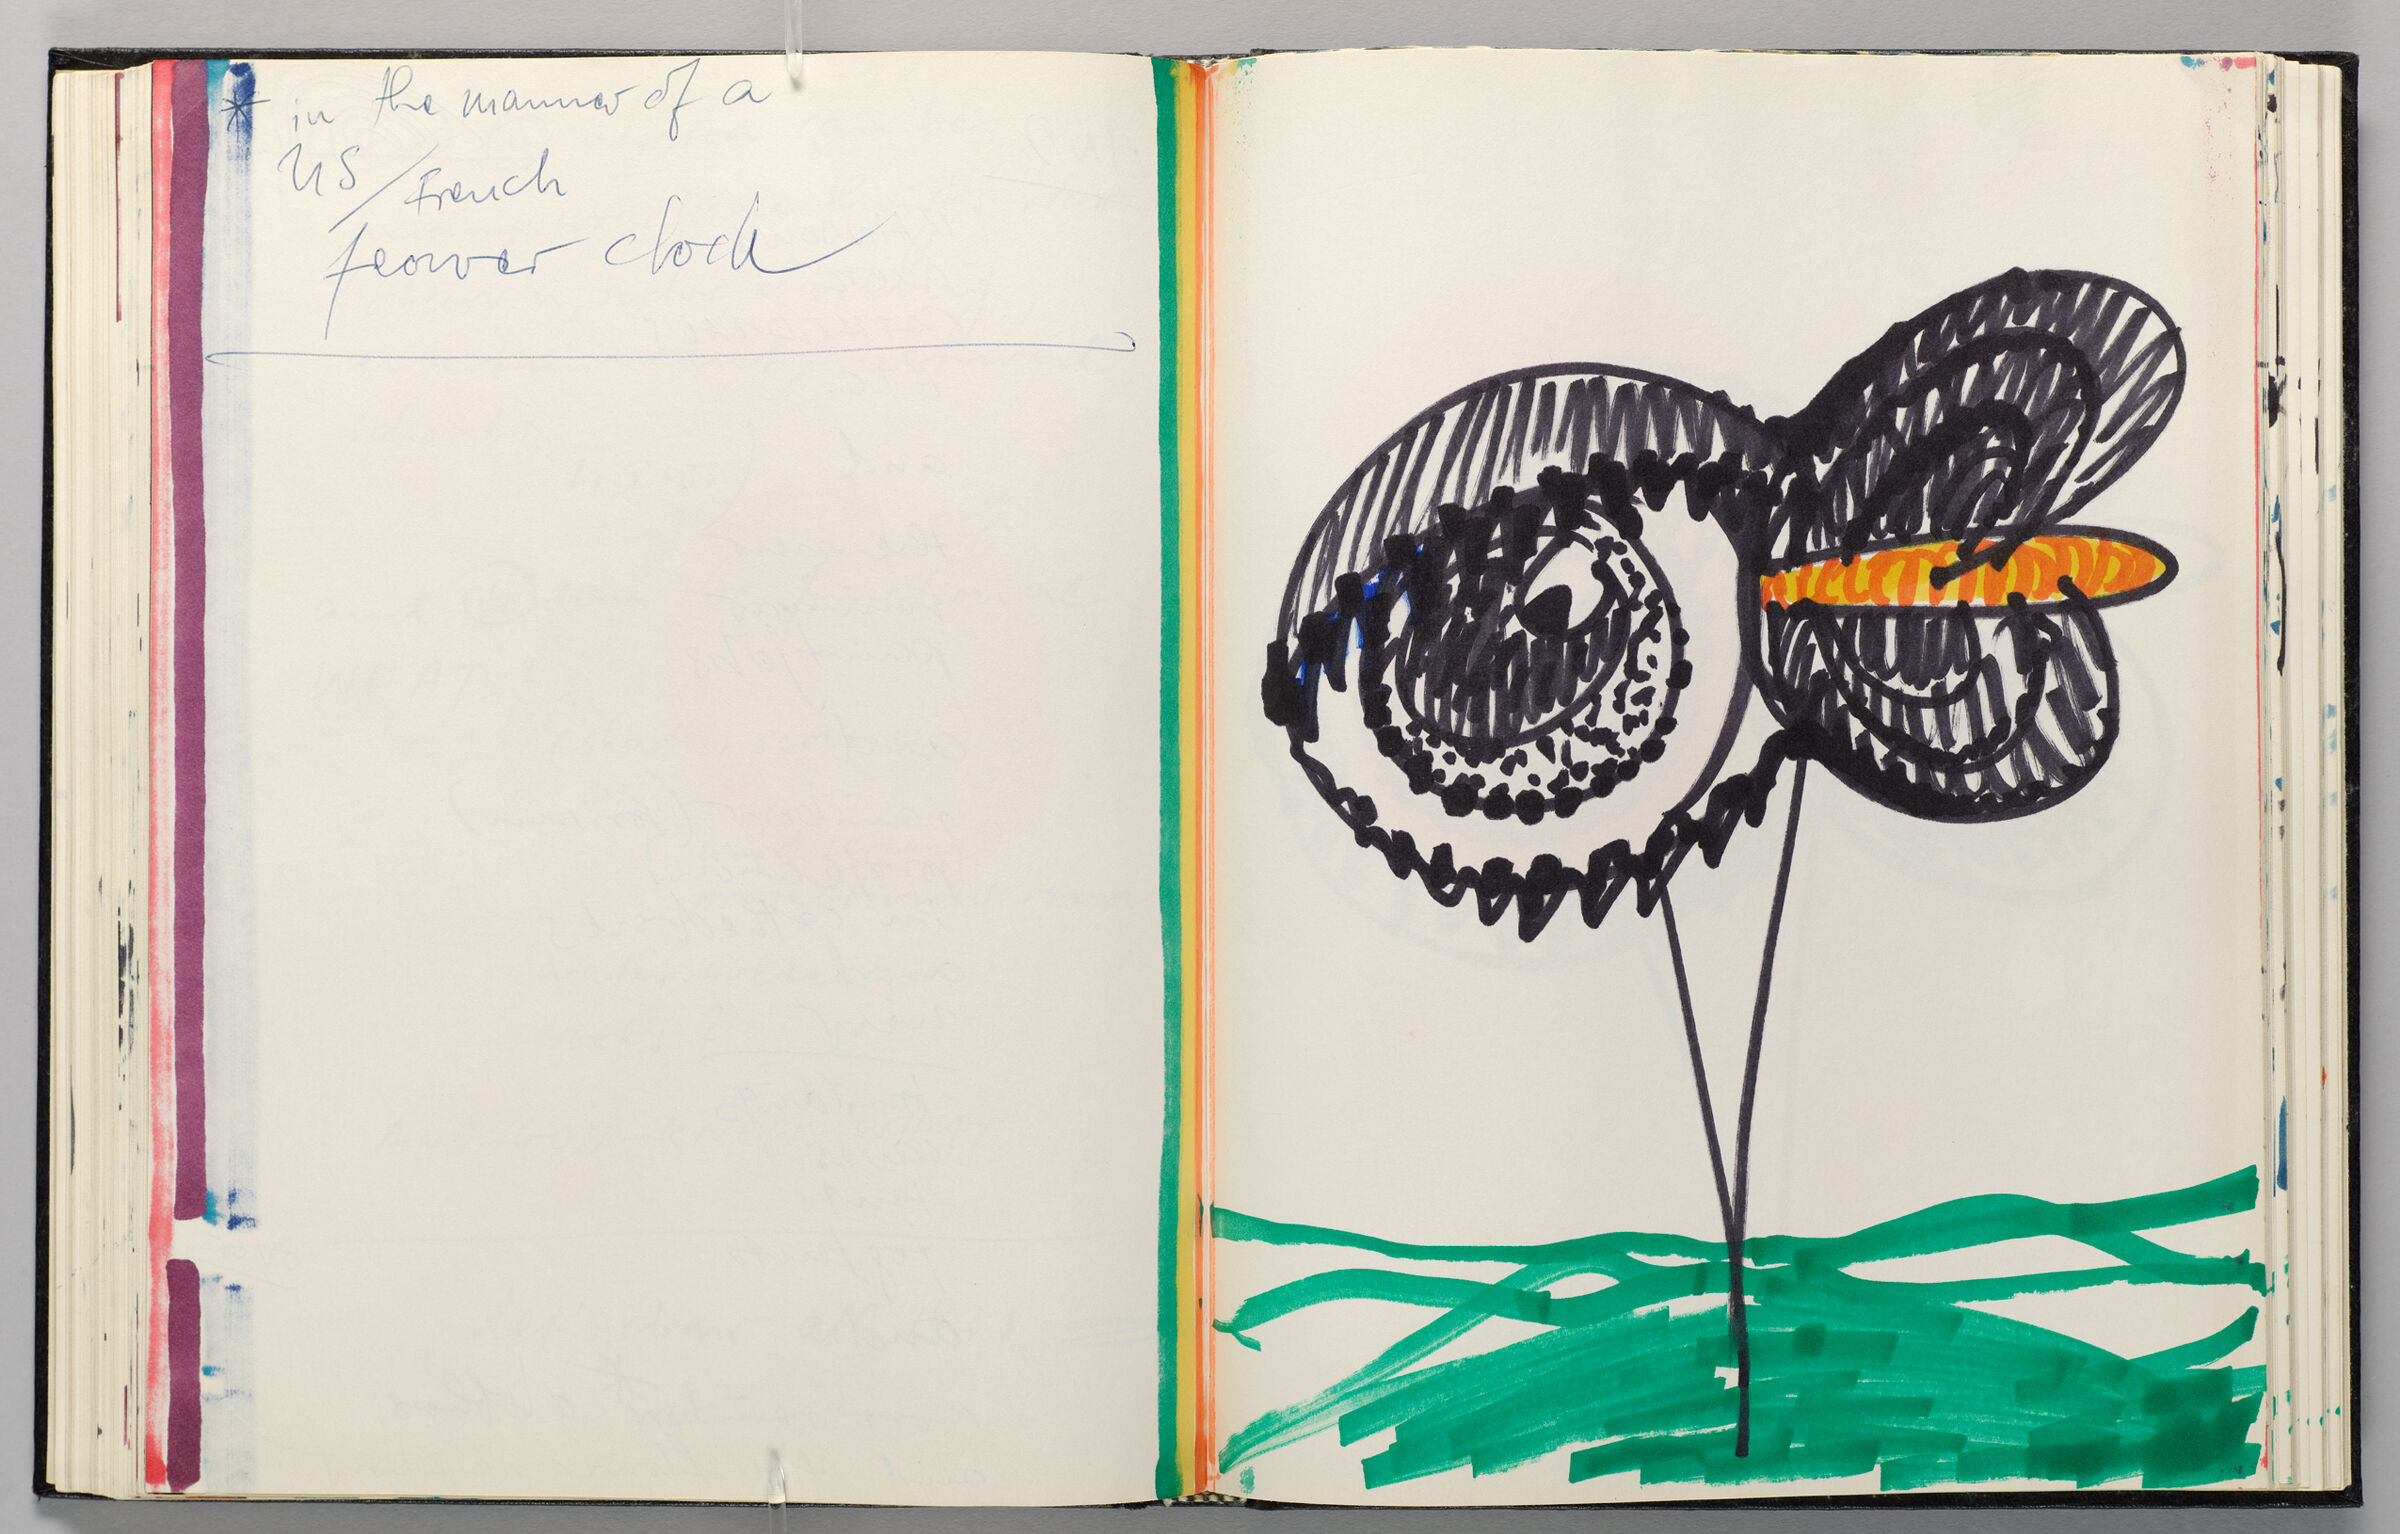 Untitled (Note, Left Page); Untitled (Barrage Balloon Design, Right Page)